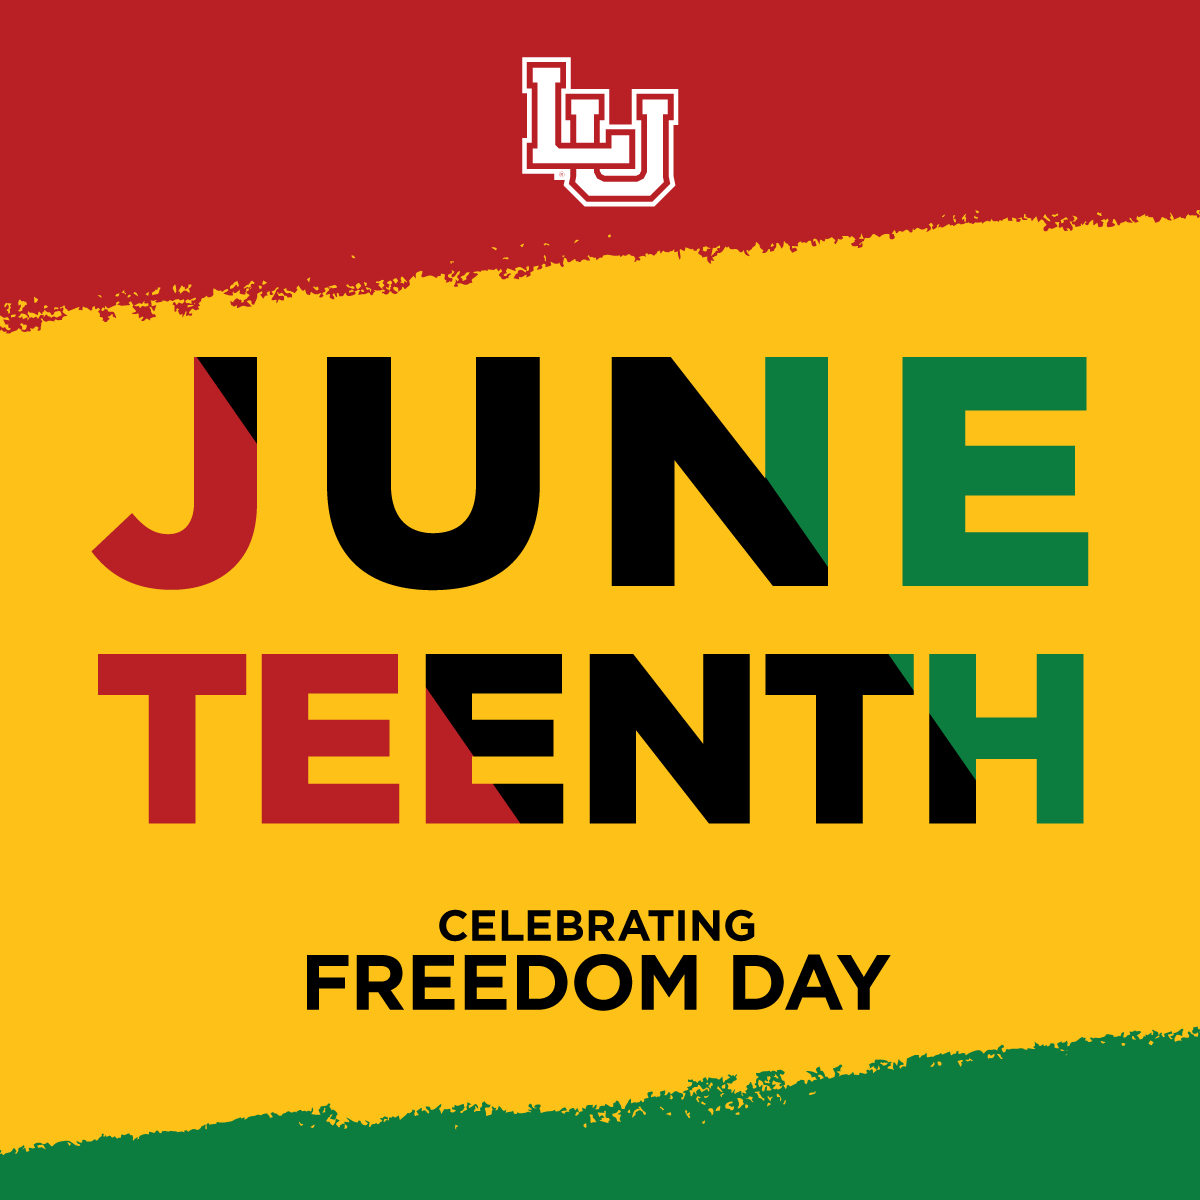 Today and everyday, we celebrate Freedom Day. Happy Juneteenth, Cardinals! #WeAreLU #Juneteenth #FreedomDay